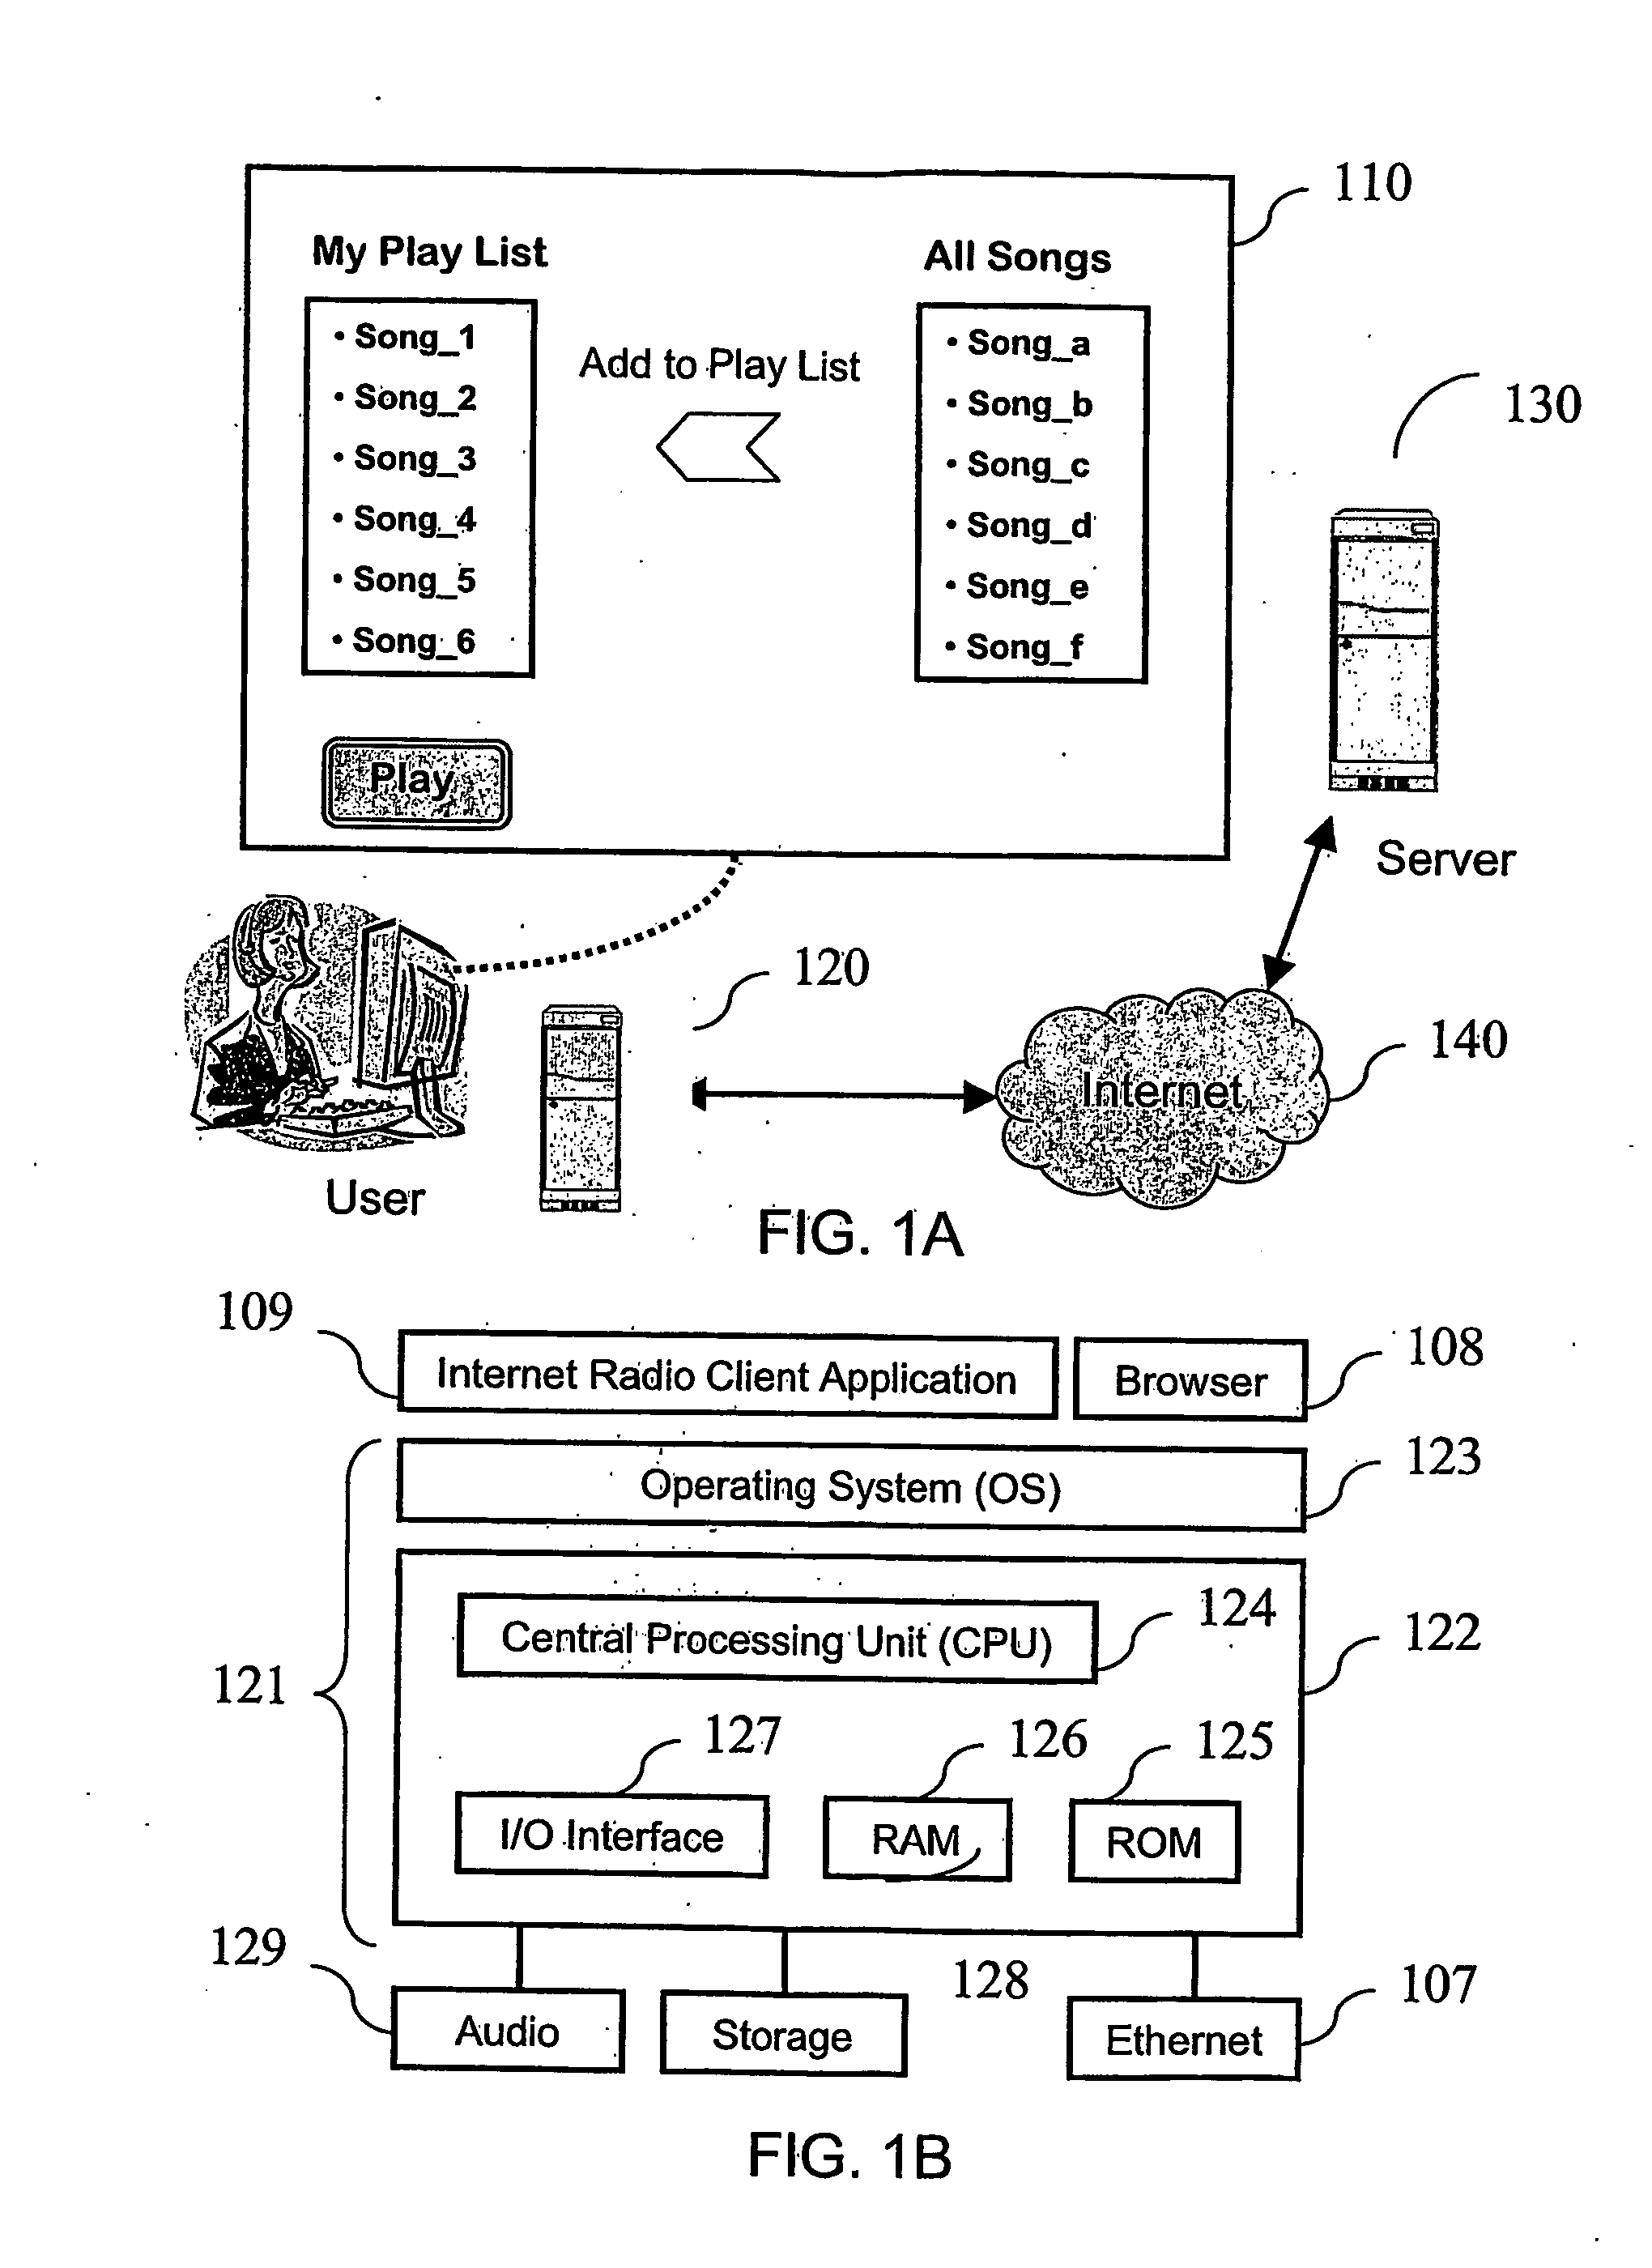 Apparatus and method for skipping songs without delay